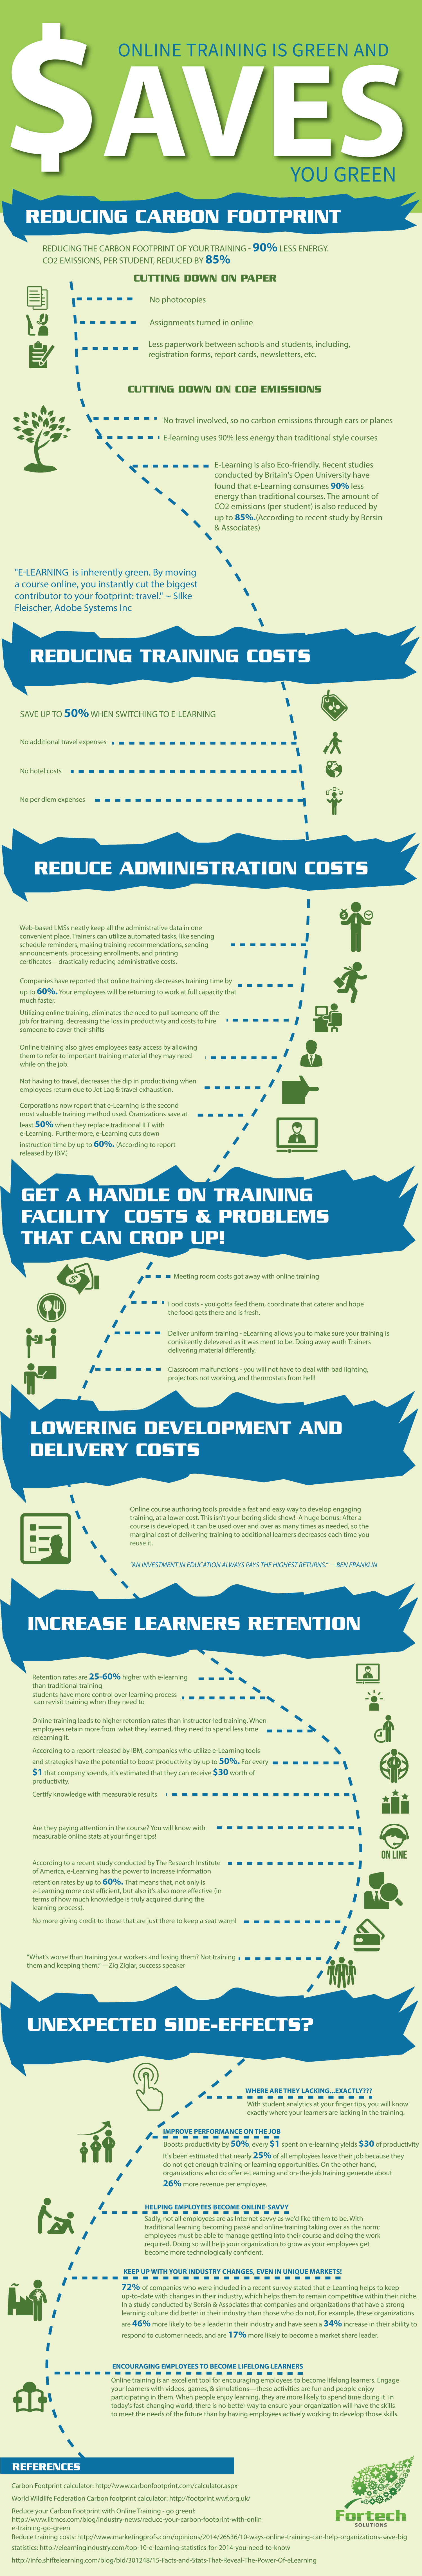 Online Training is Green Infographic